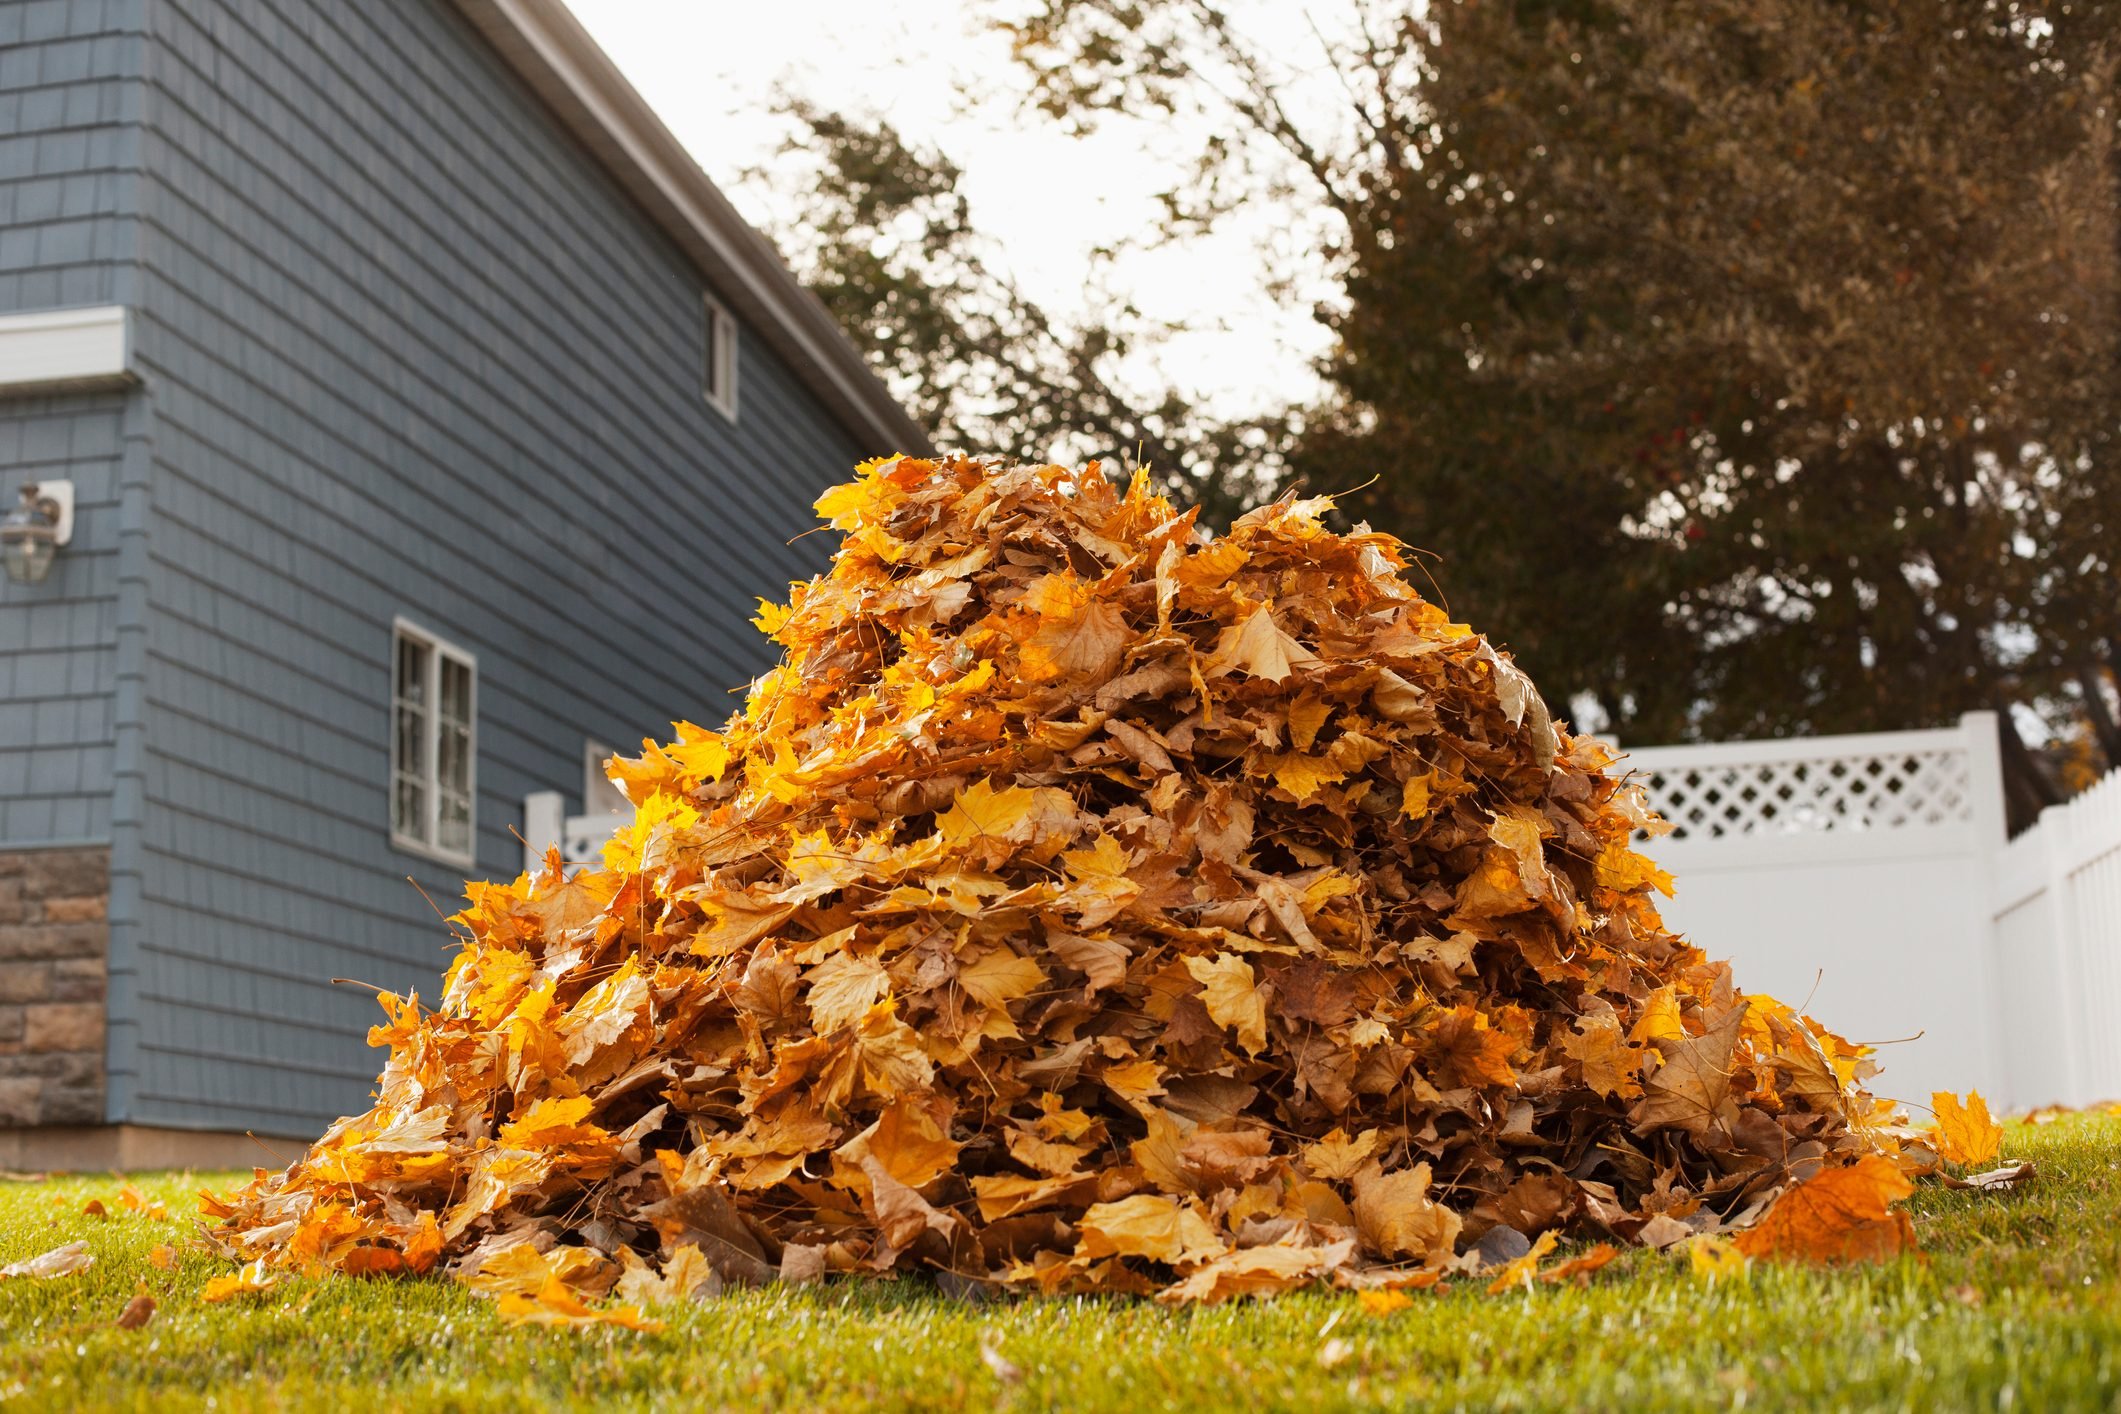 How Can You Reuse and Repurpose Dry Leaves?